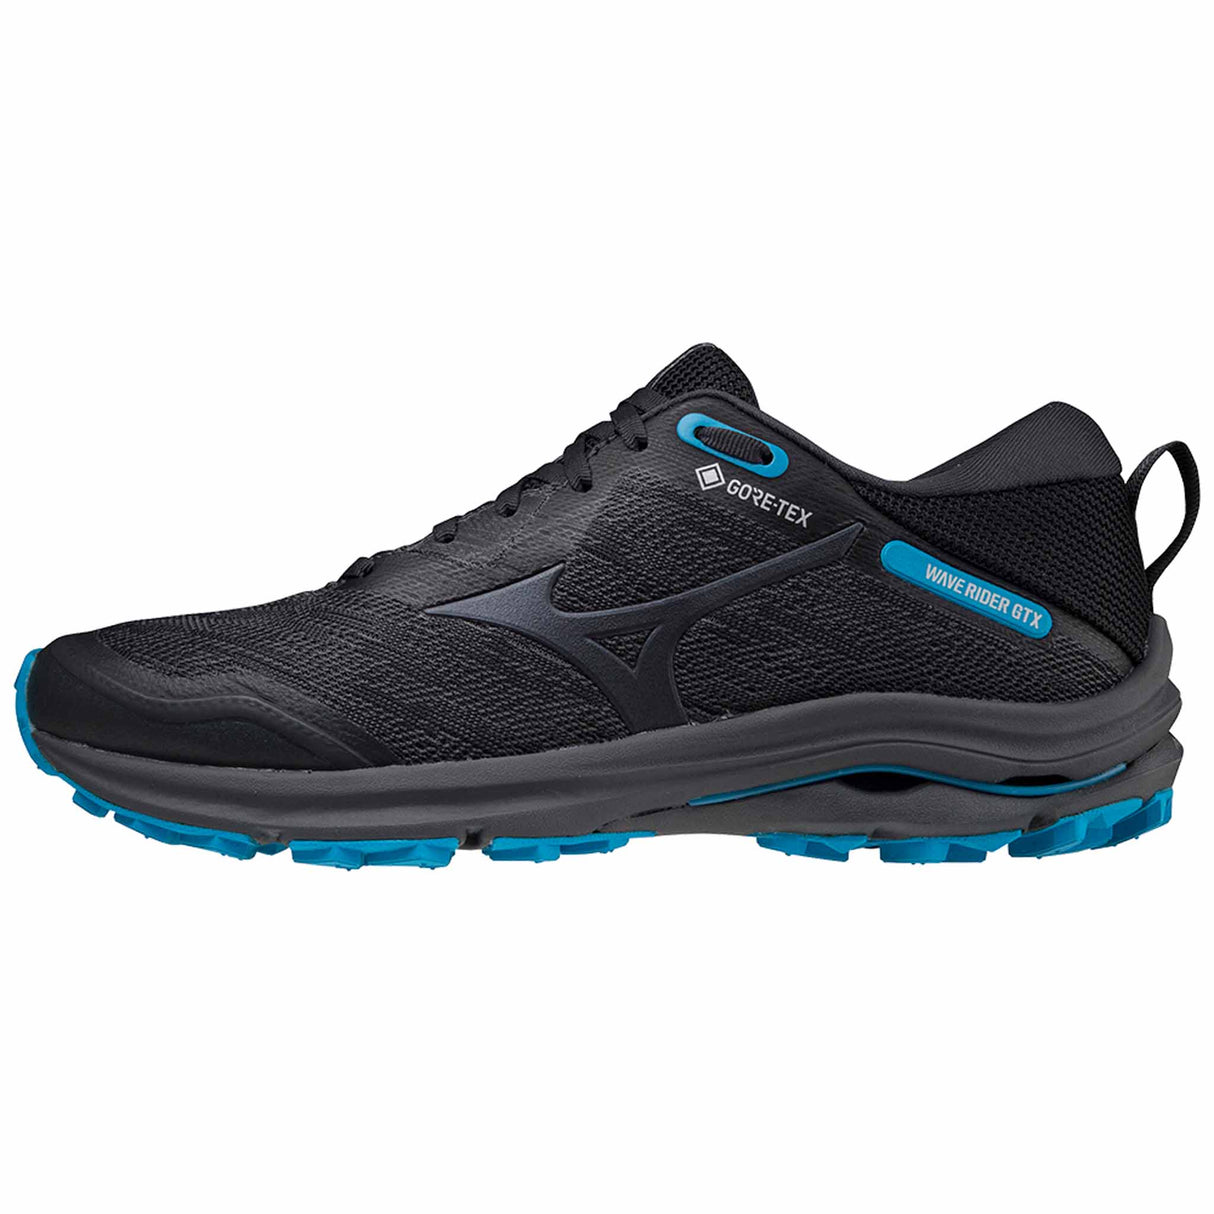 Mizuno Wave Rider GTX chaussures de course à pied femme - blackened pearl lateral